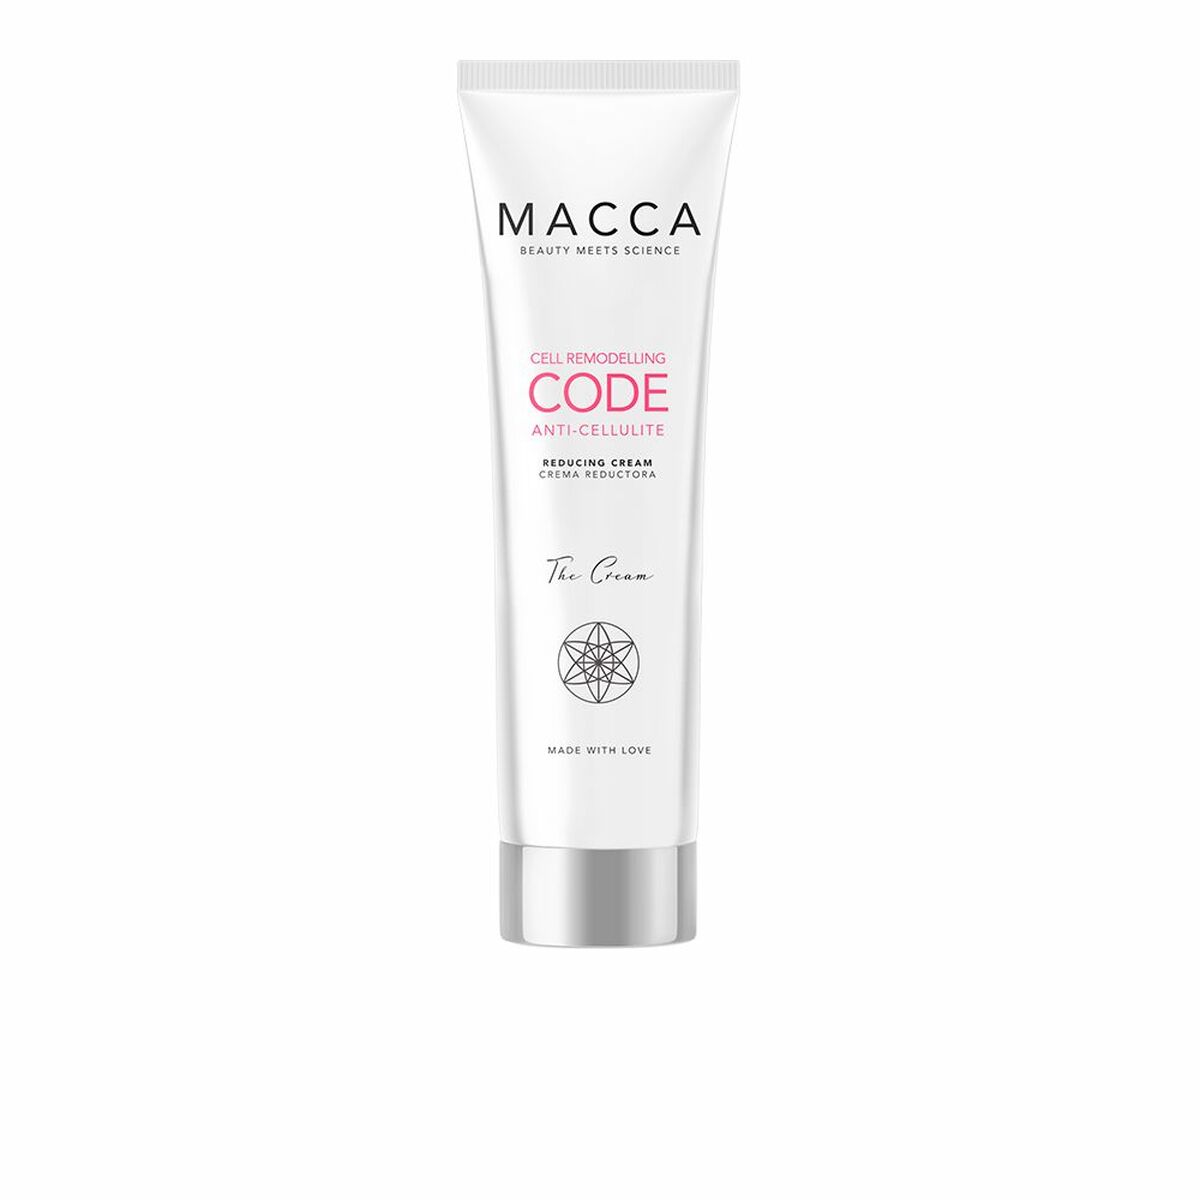 Crème Réductrice Macca Cell Remodeling Code Cellulite Anti-Cellulite 150 ml